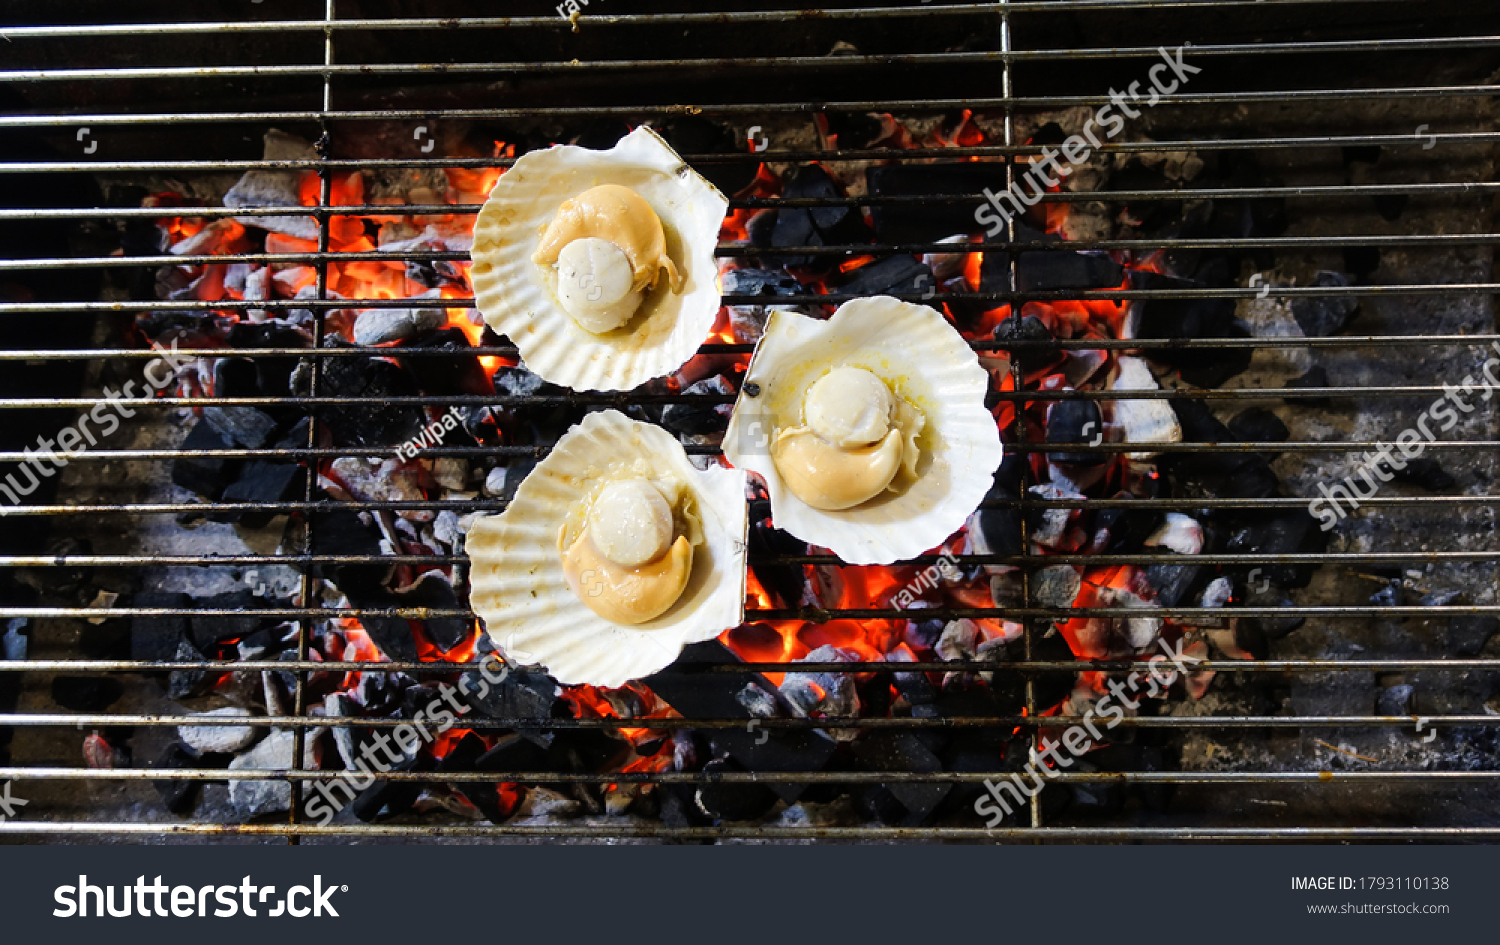 Shells are grilled on a charcoal grill dinner outdoors. Shells are burned on the grill. Shells cooking grilling on flaming grill steamed.                          #1793110138